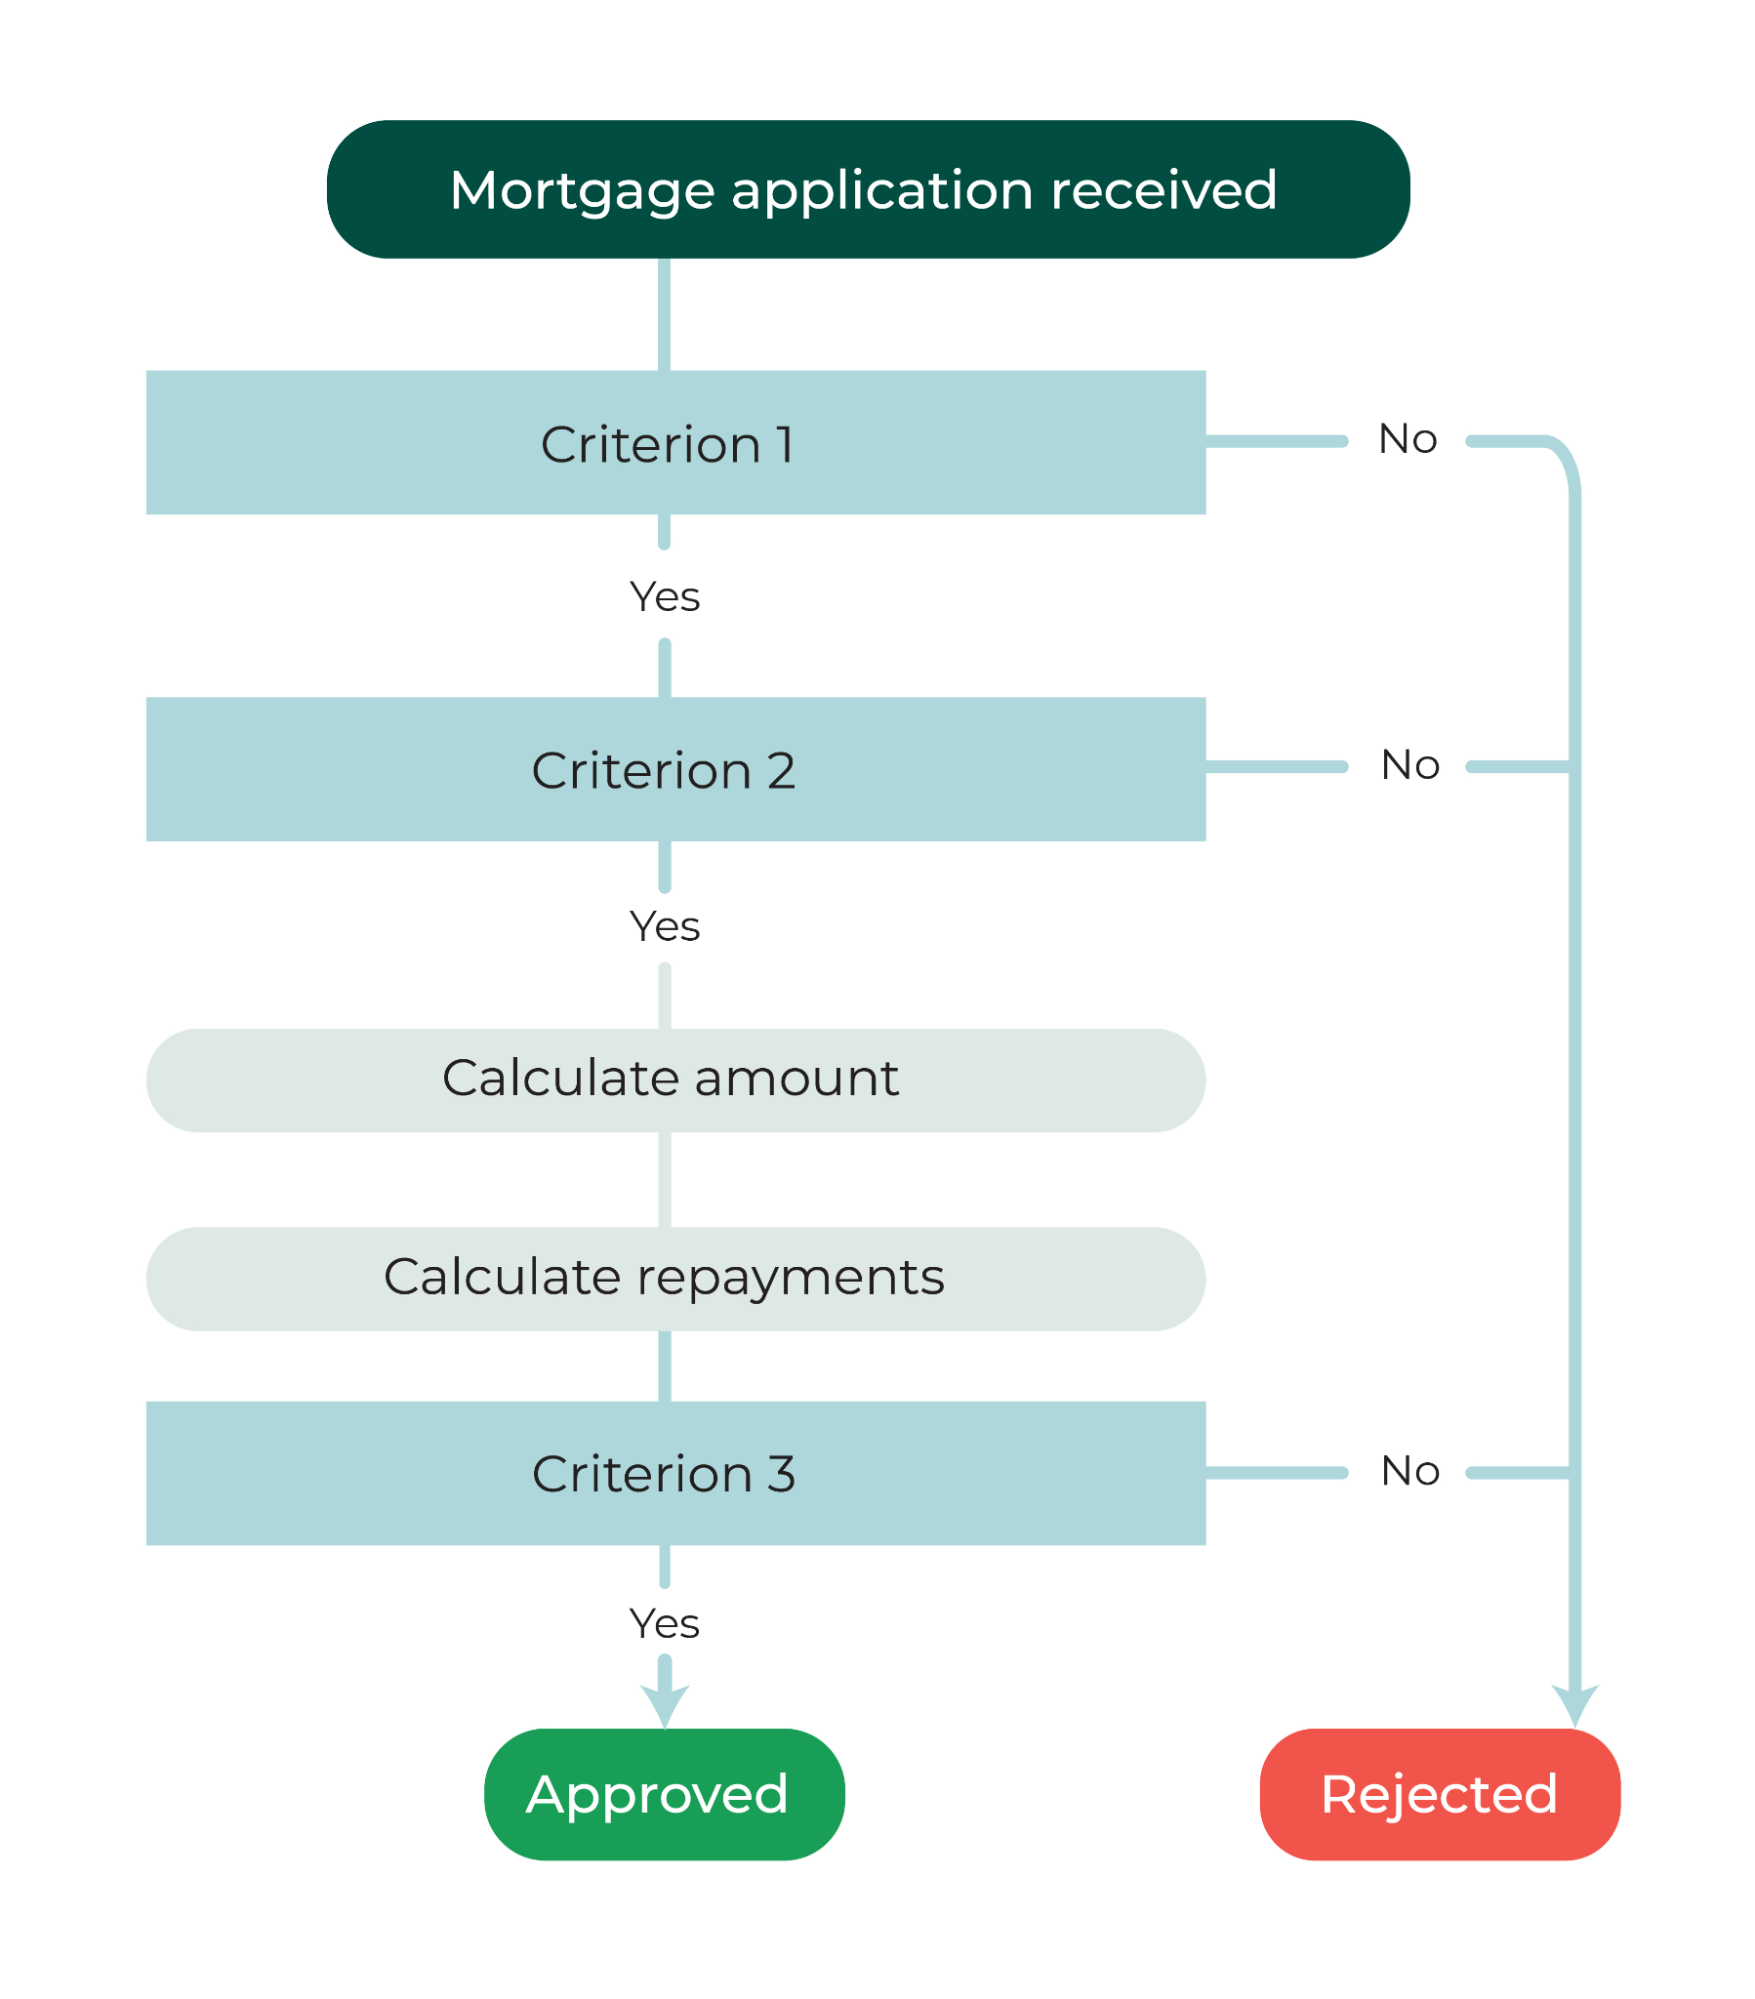 Global Bank flowchart for approving mortgages